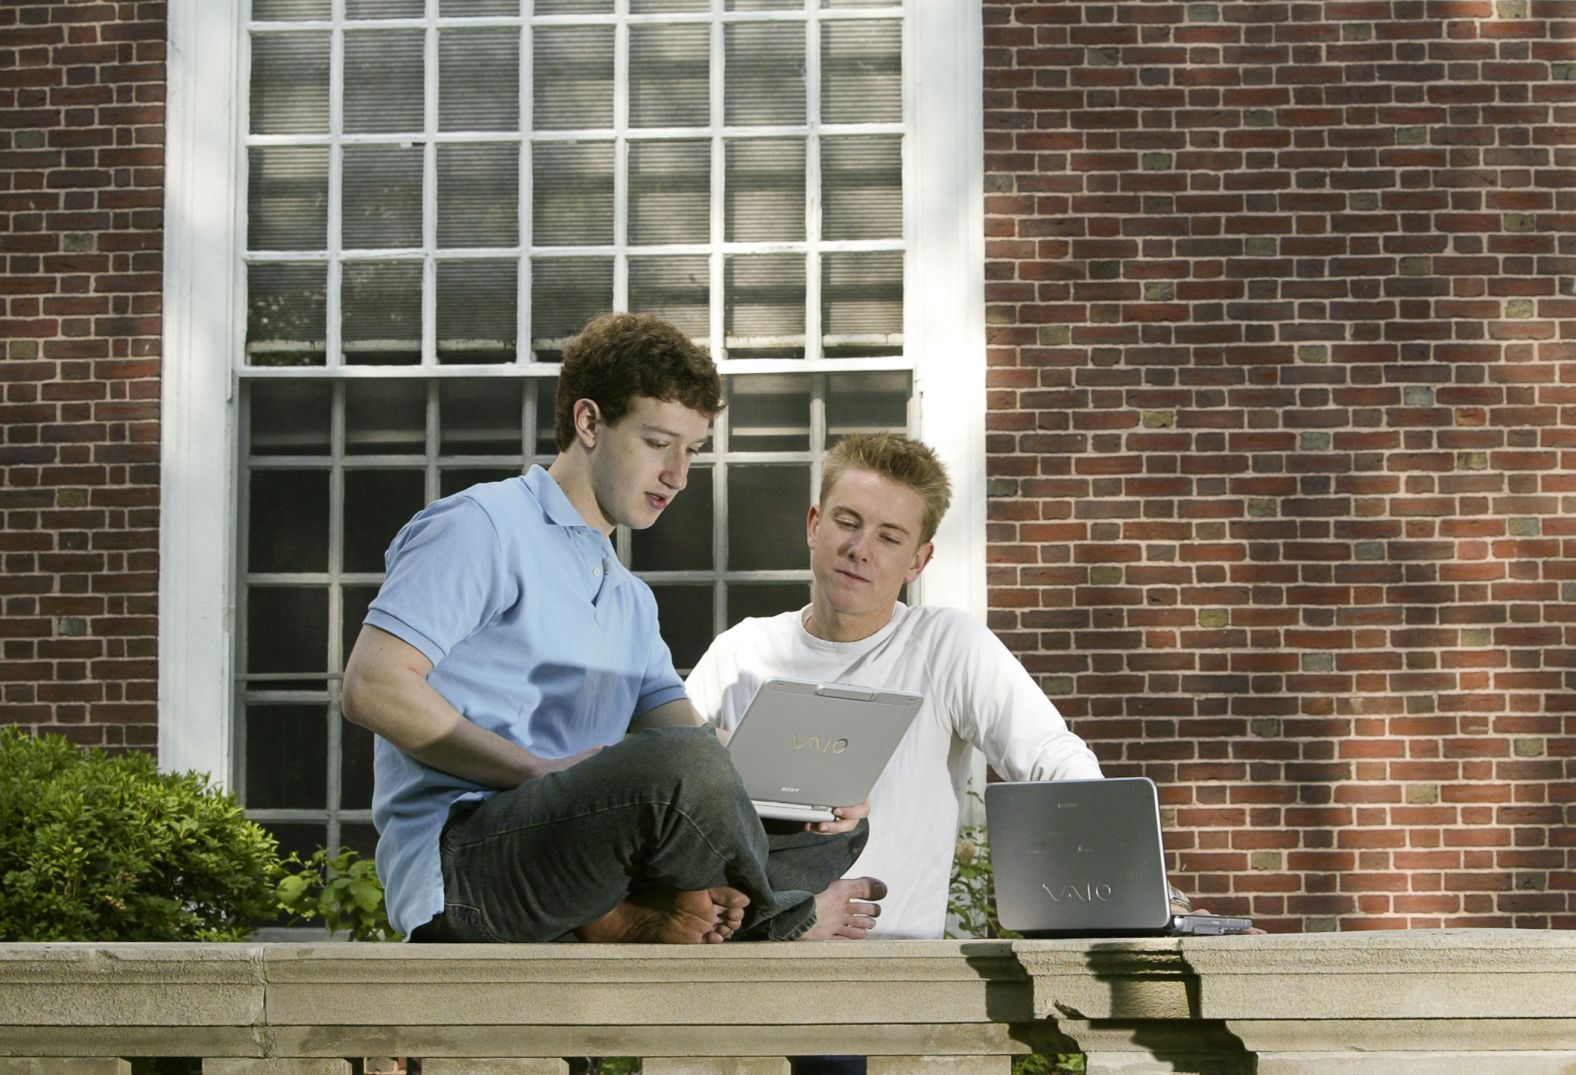 Zuckerberg, left, and Facebook co-creator Chris Hughes work on computers at Harvard University in Cambridge, Massachusetts, in May 2004. This was a few months after they launched Facebook from Zuckerberg's dorm room.